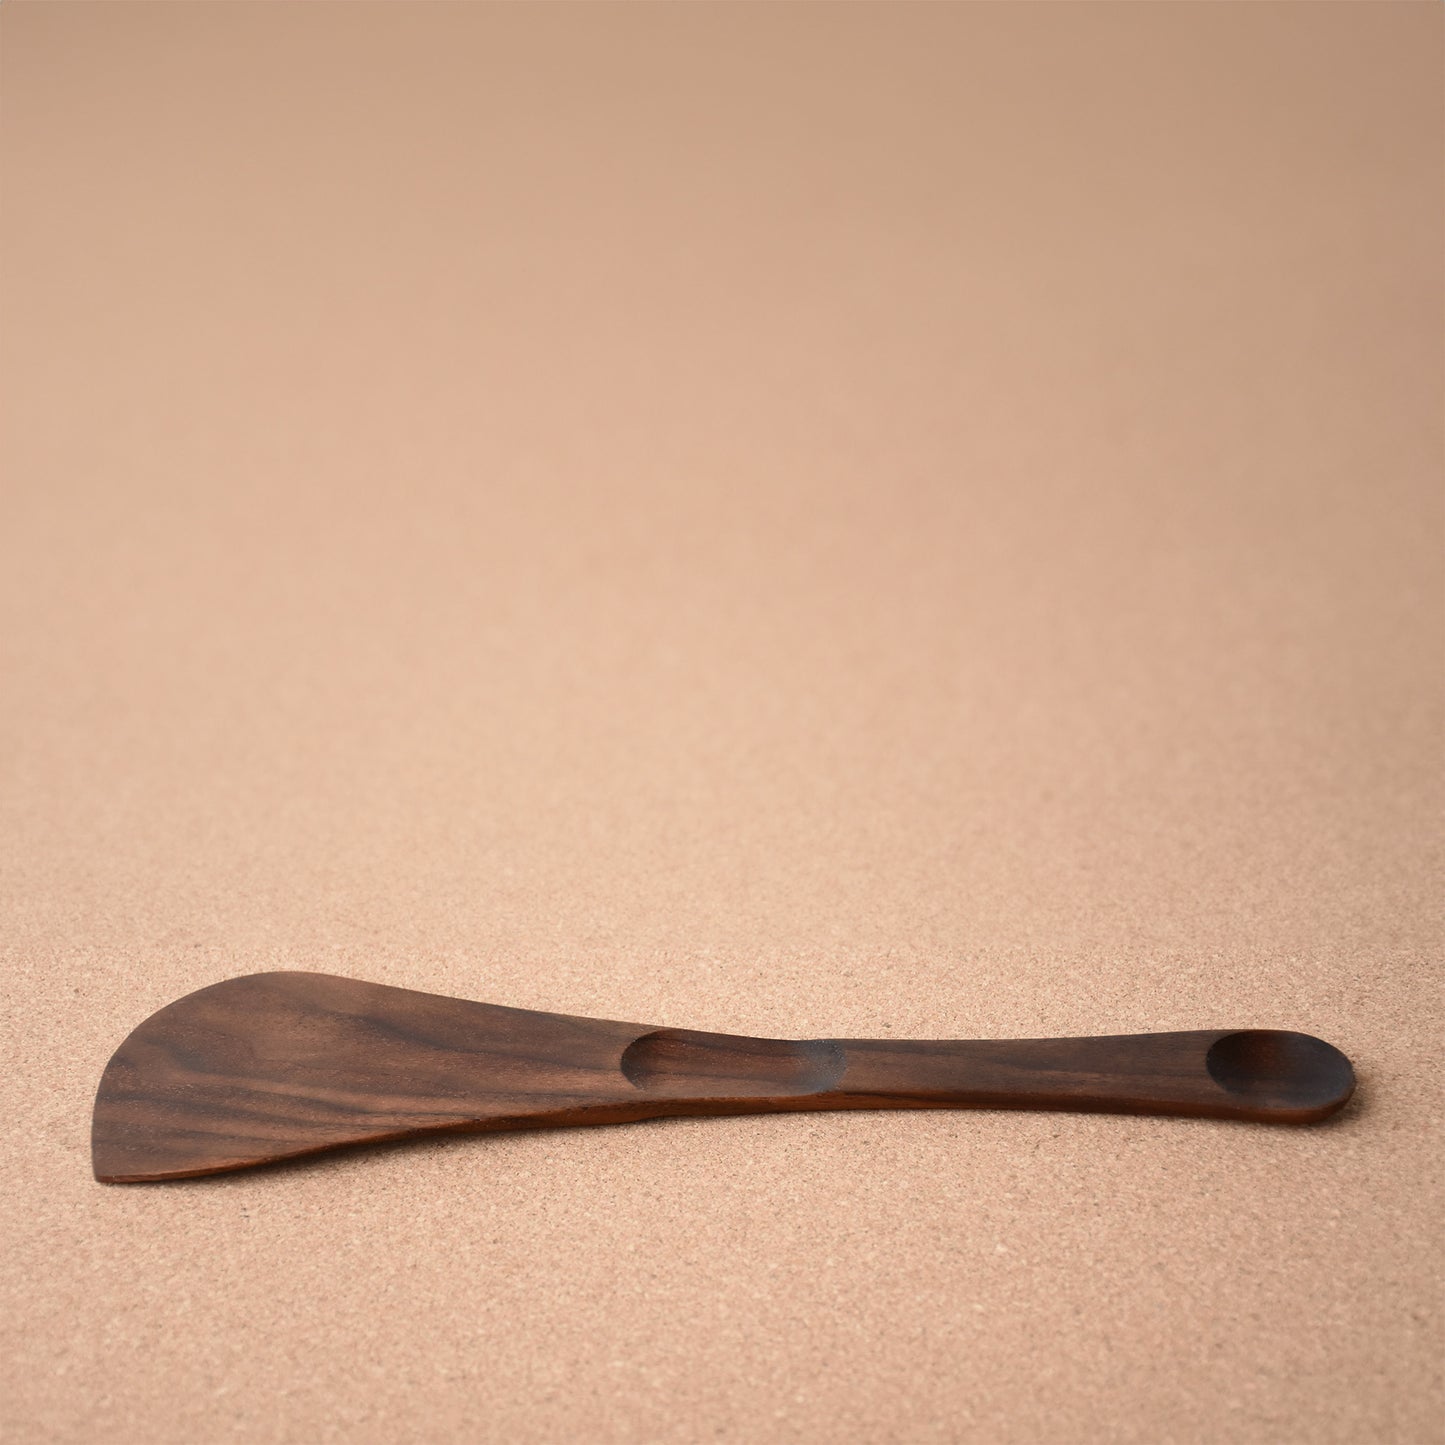 Carved Wooden Spatula - Walnut or Ash